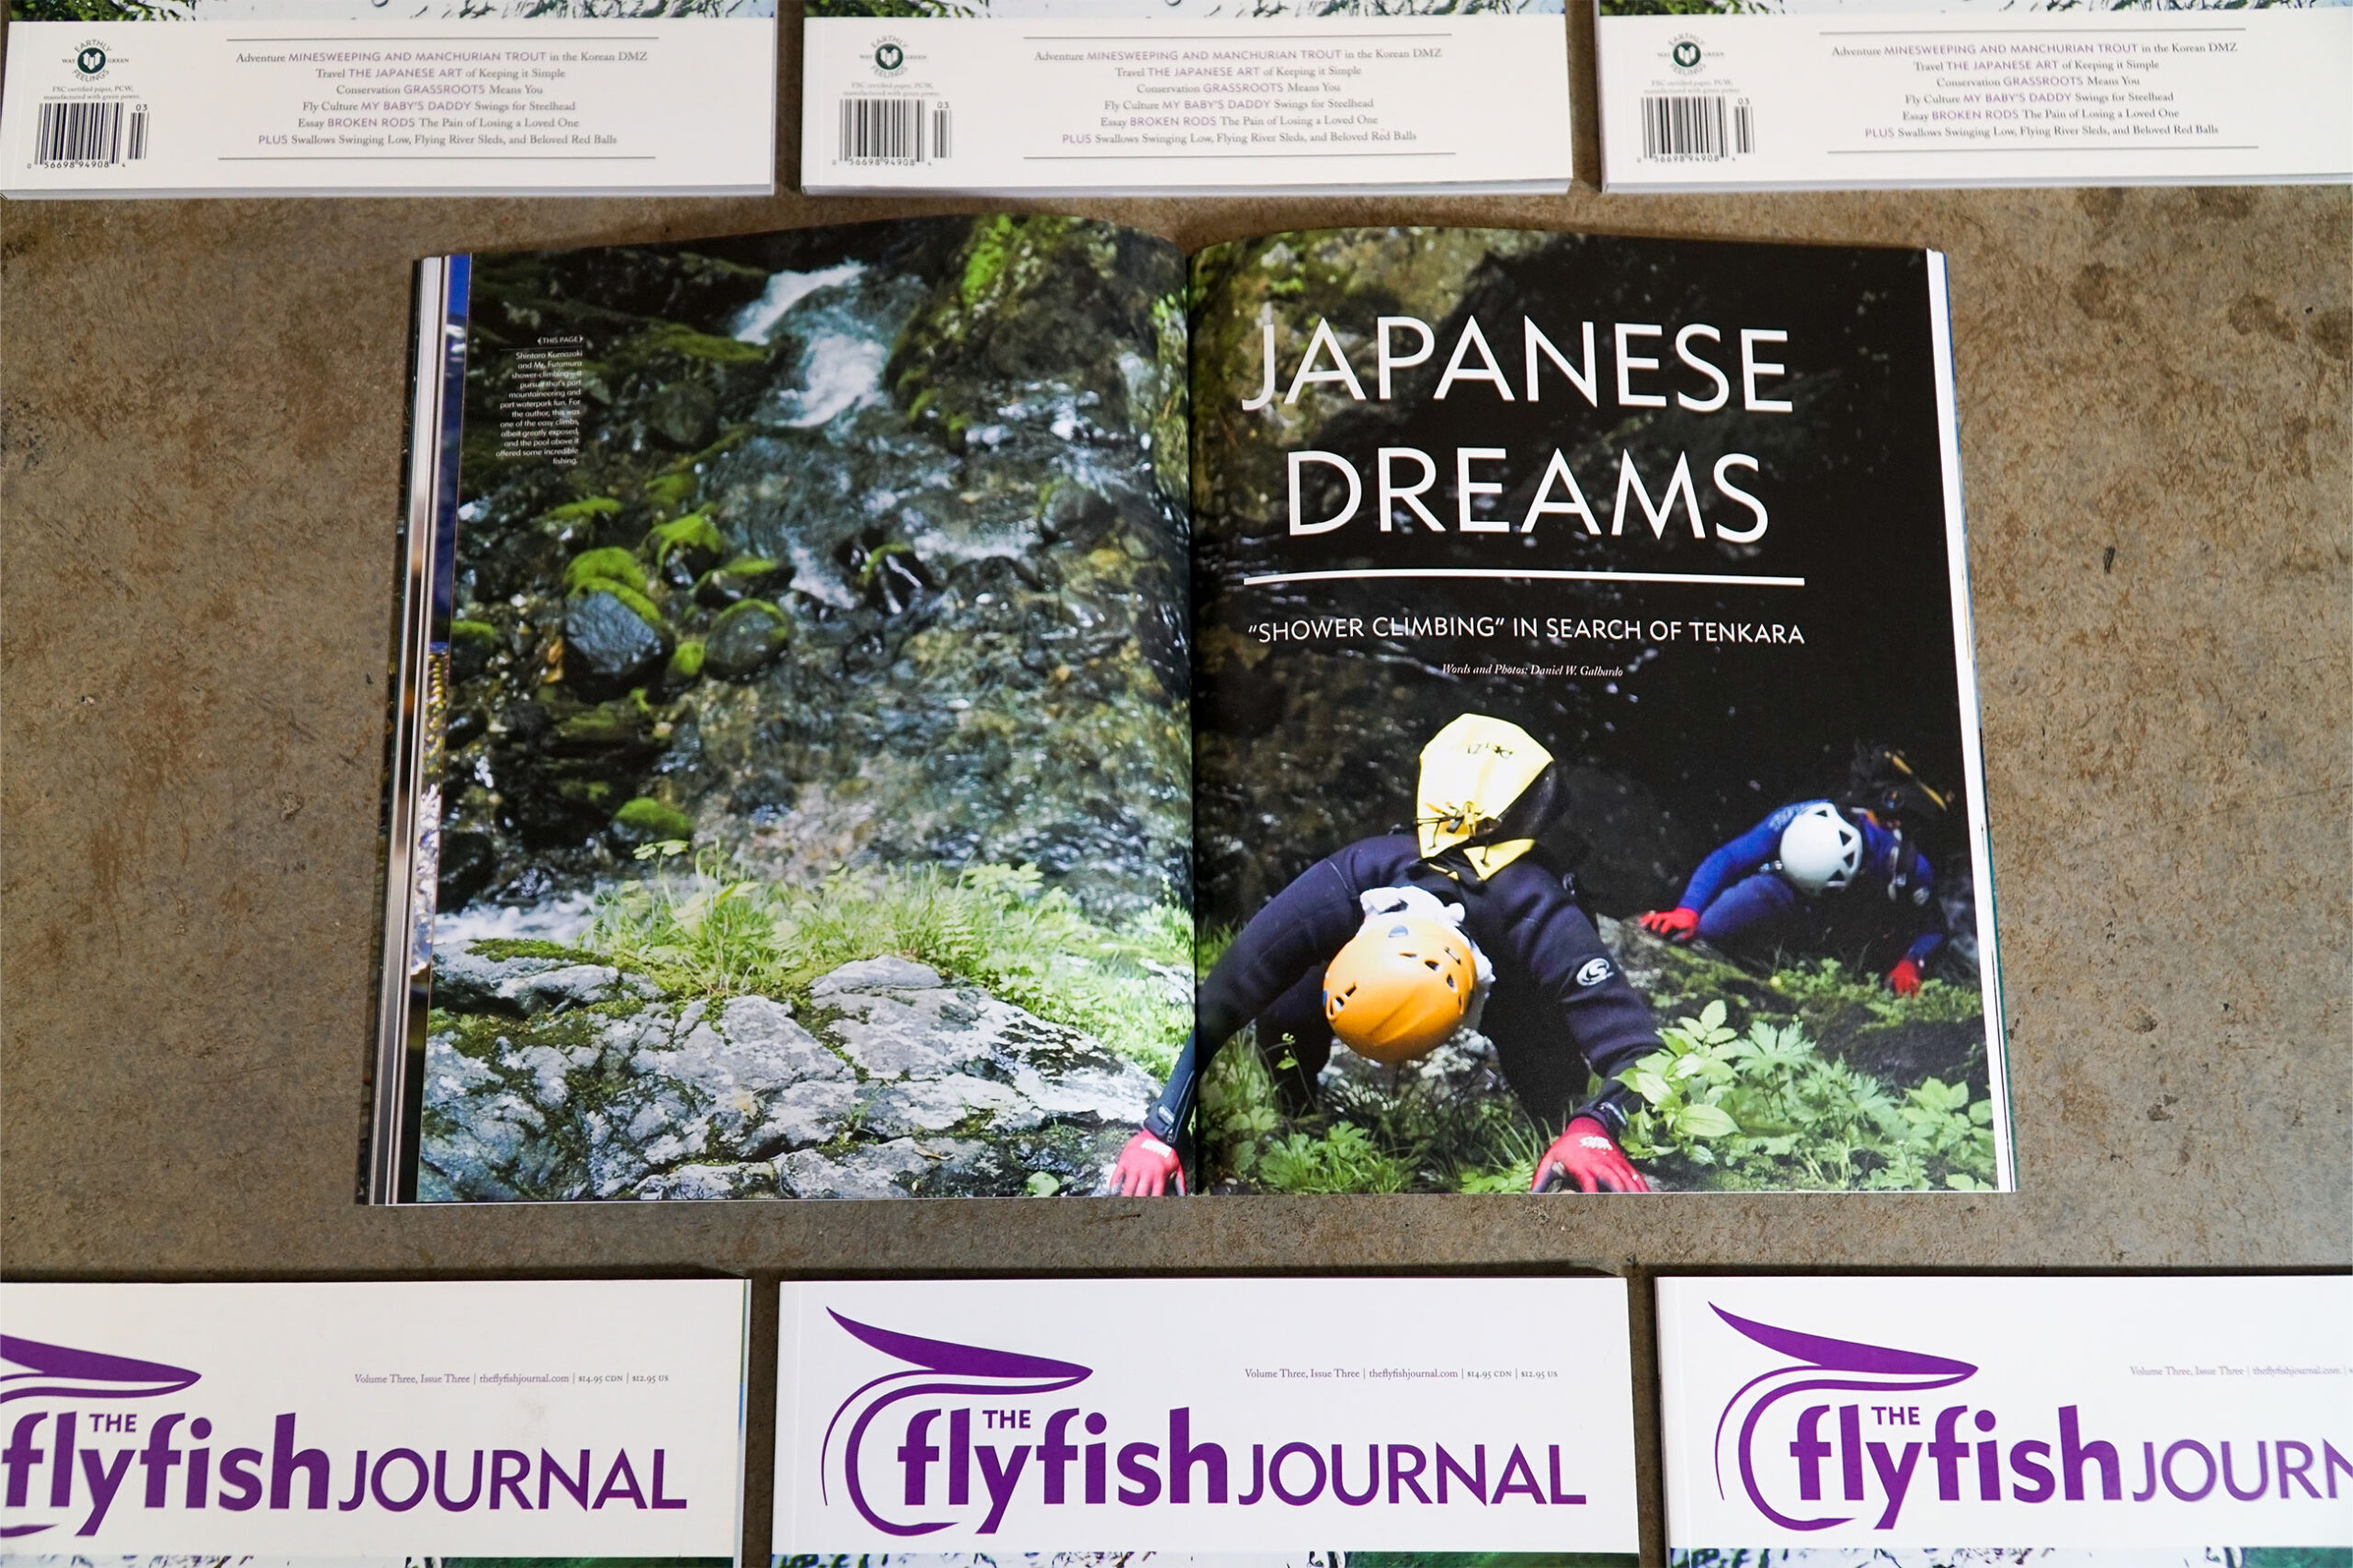 The Flyfish Journal Volume 3 Issue 3 Feature Japanese Dreams